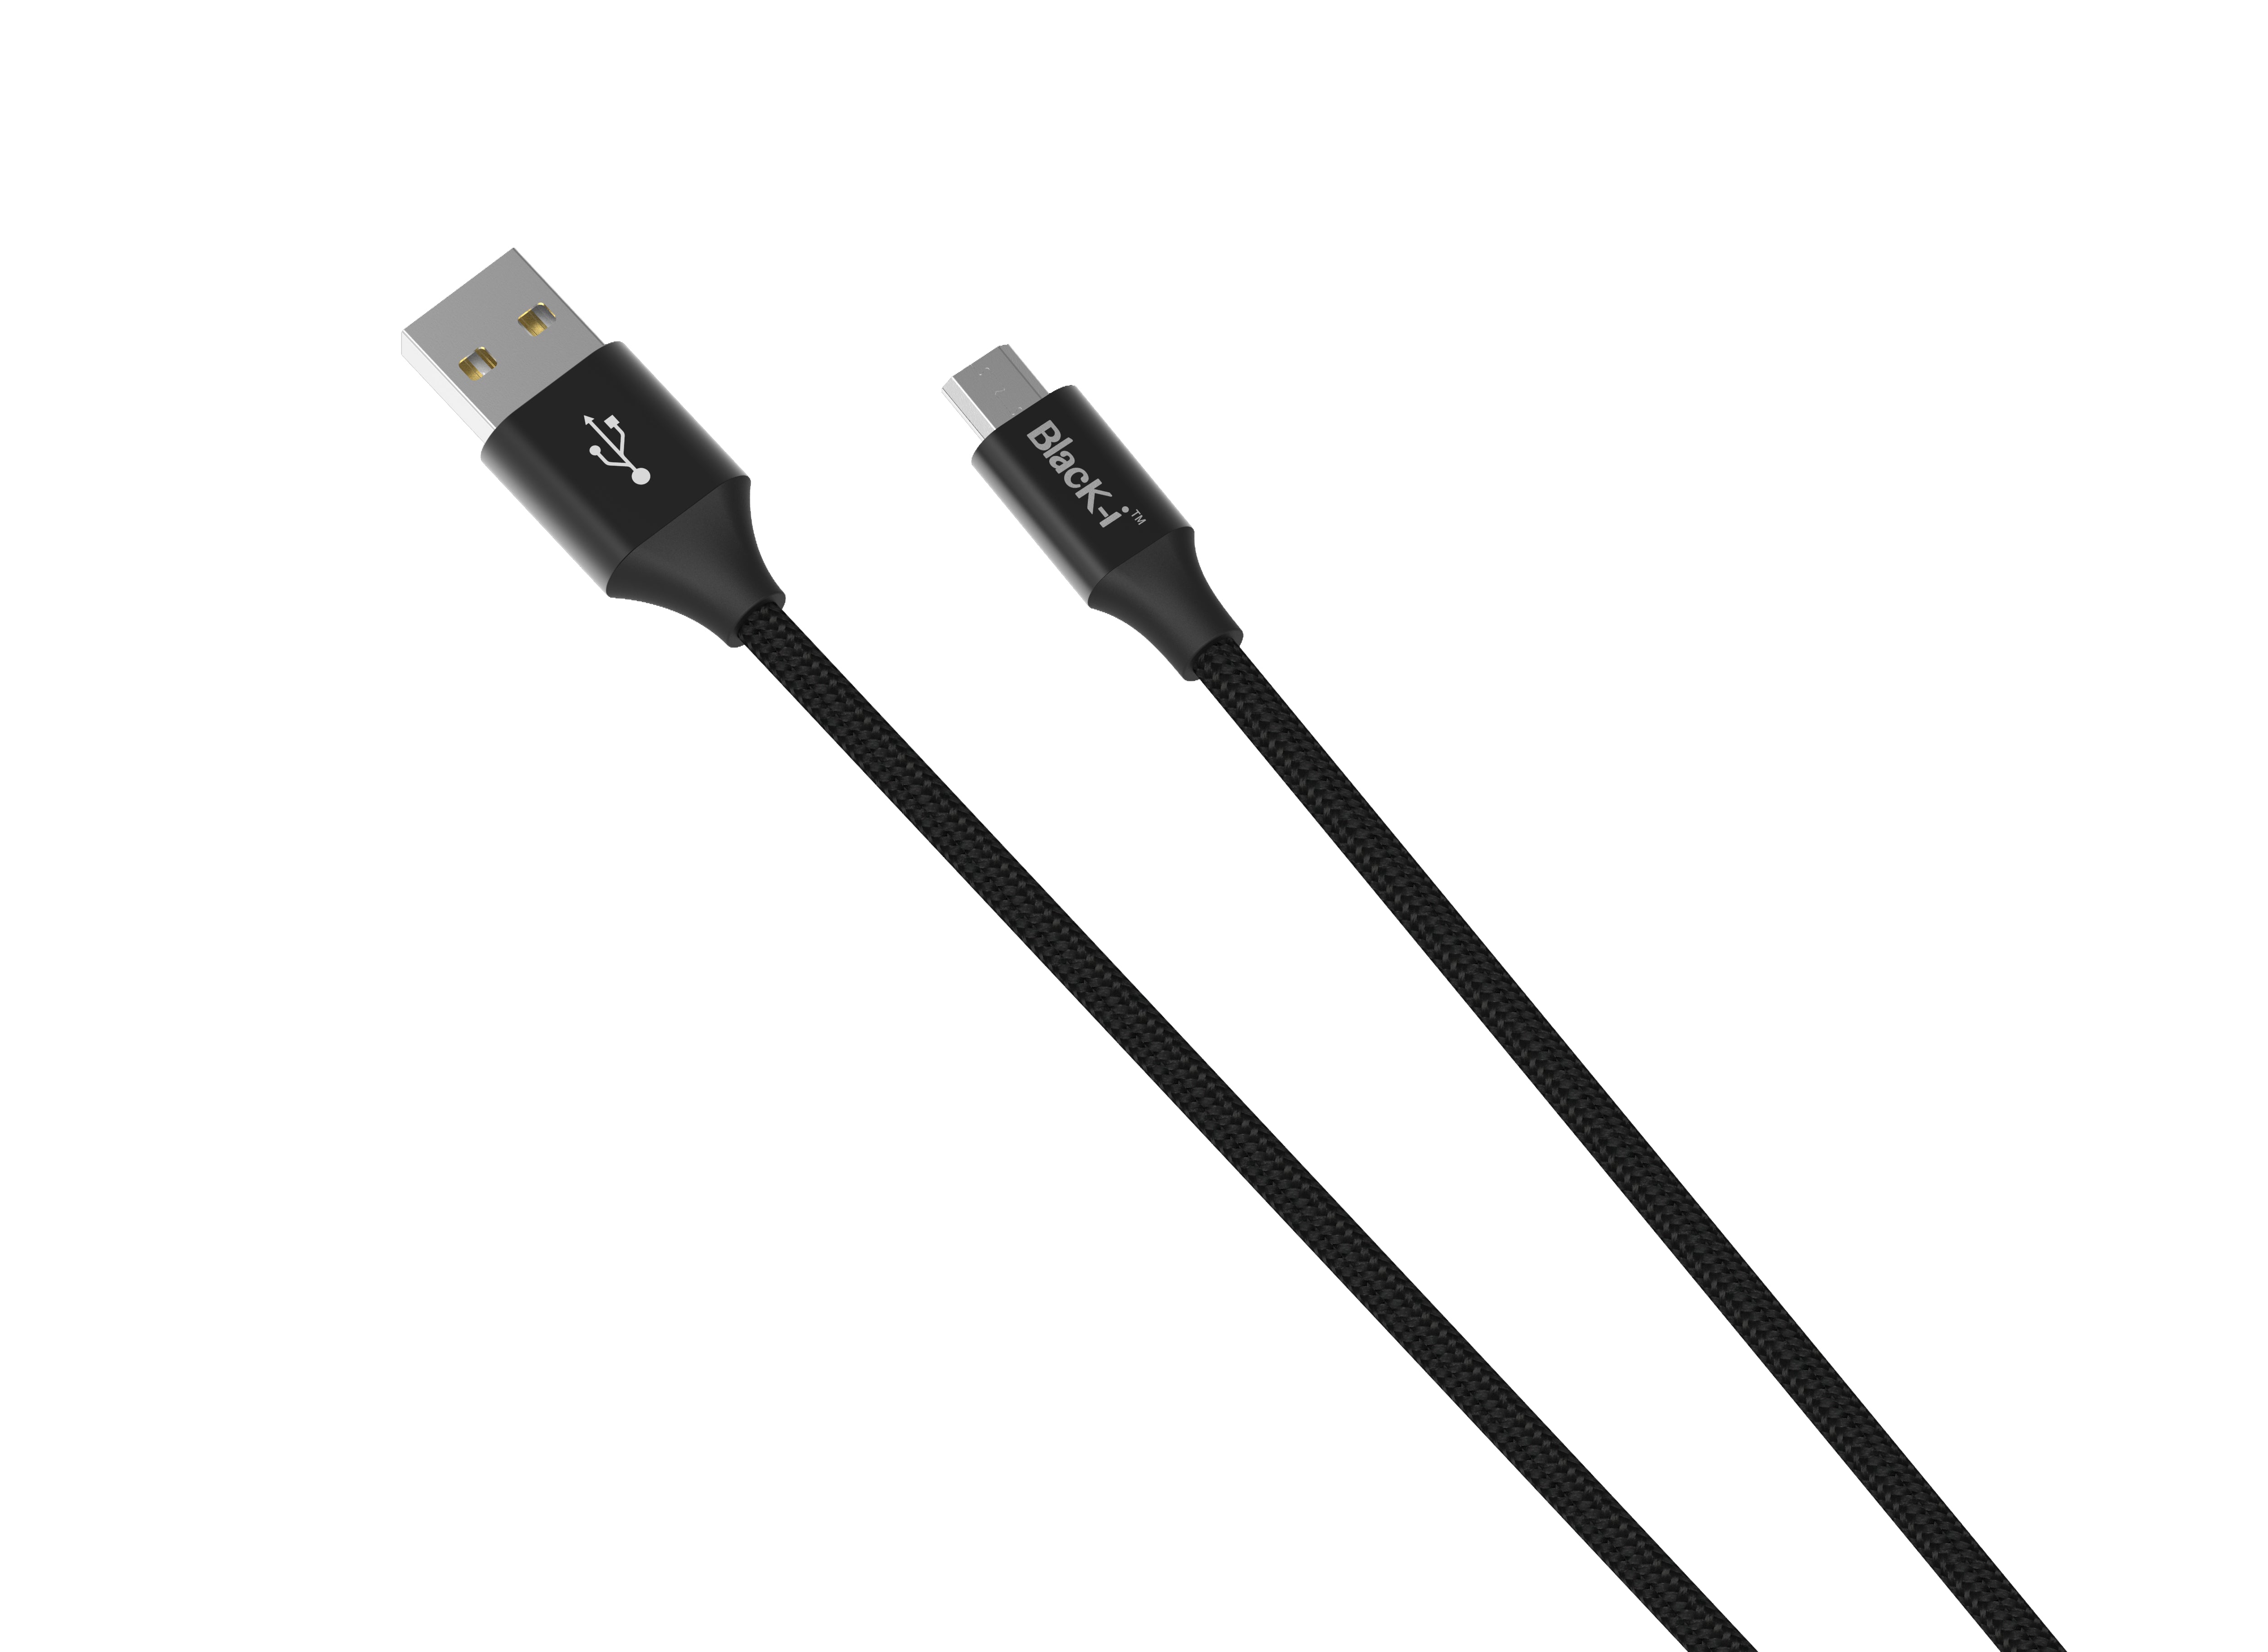 Black-i USB 2.0 to Micro Cable 2 Meter